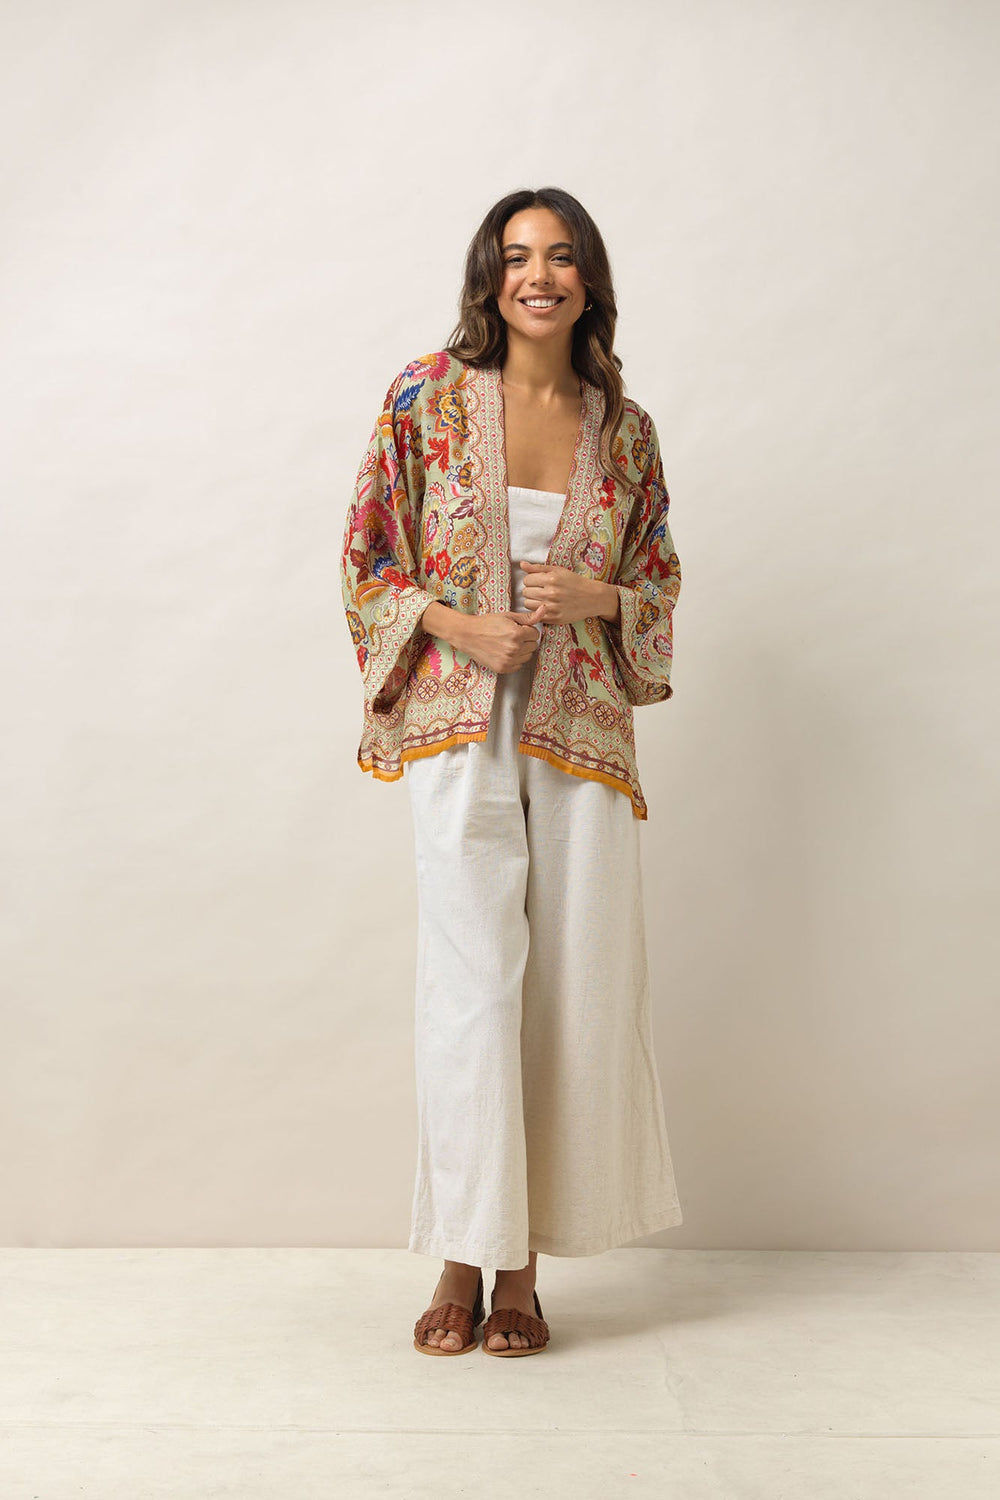 Women's short kimono in taupe with Indian flower floral print by One Hundred Stars